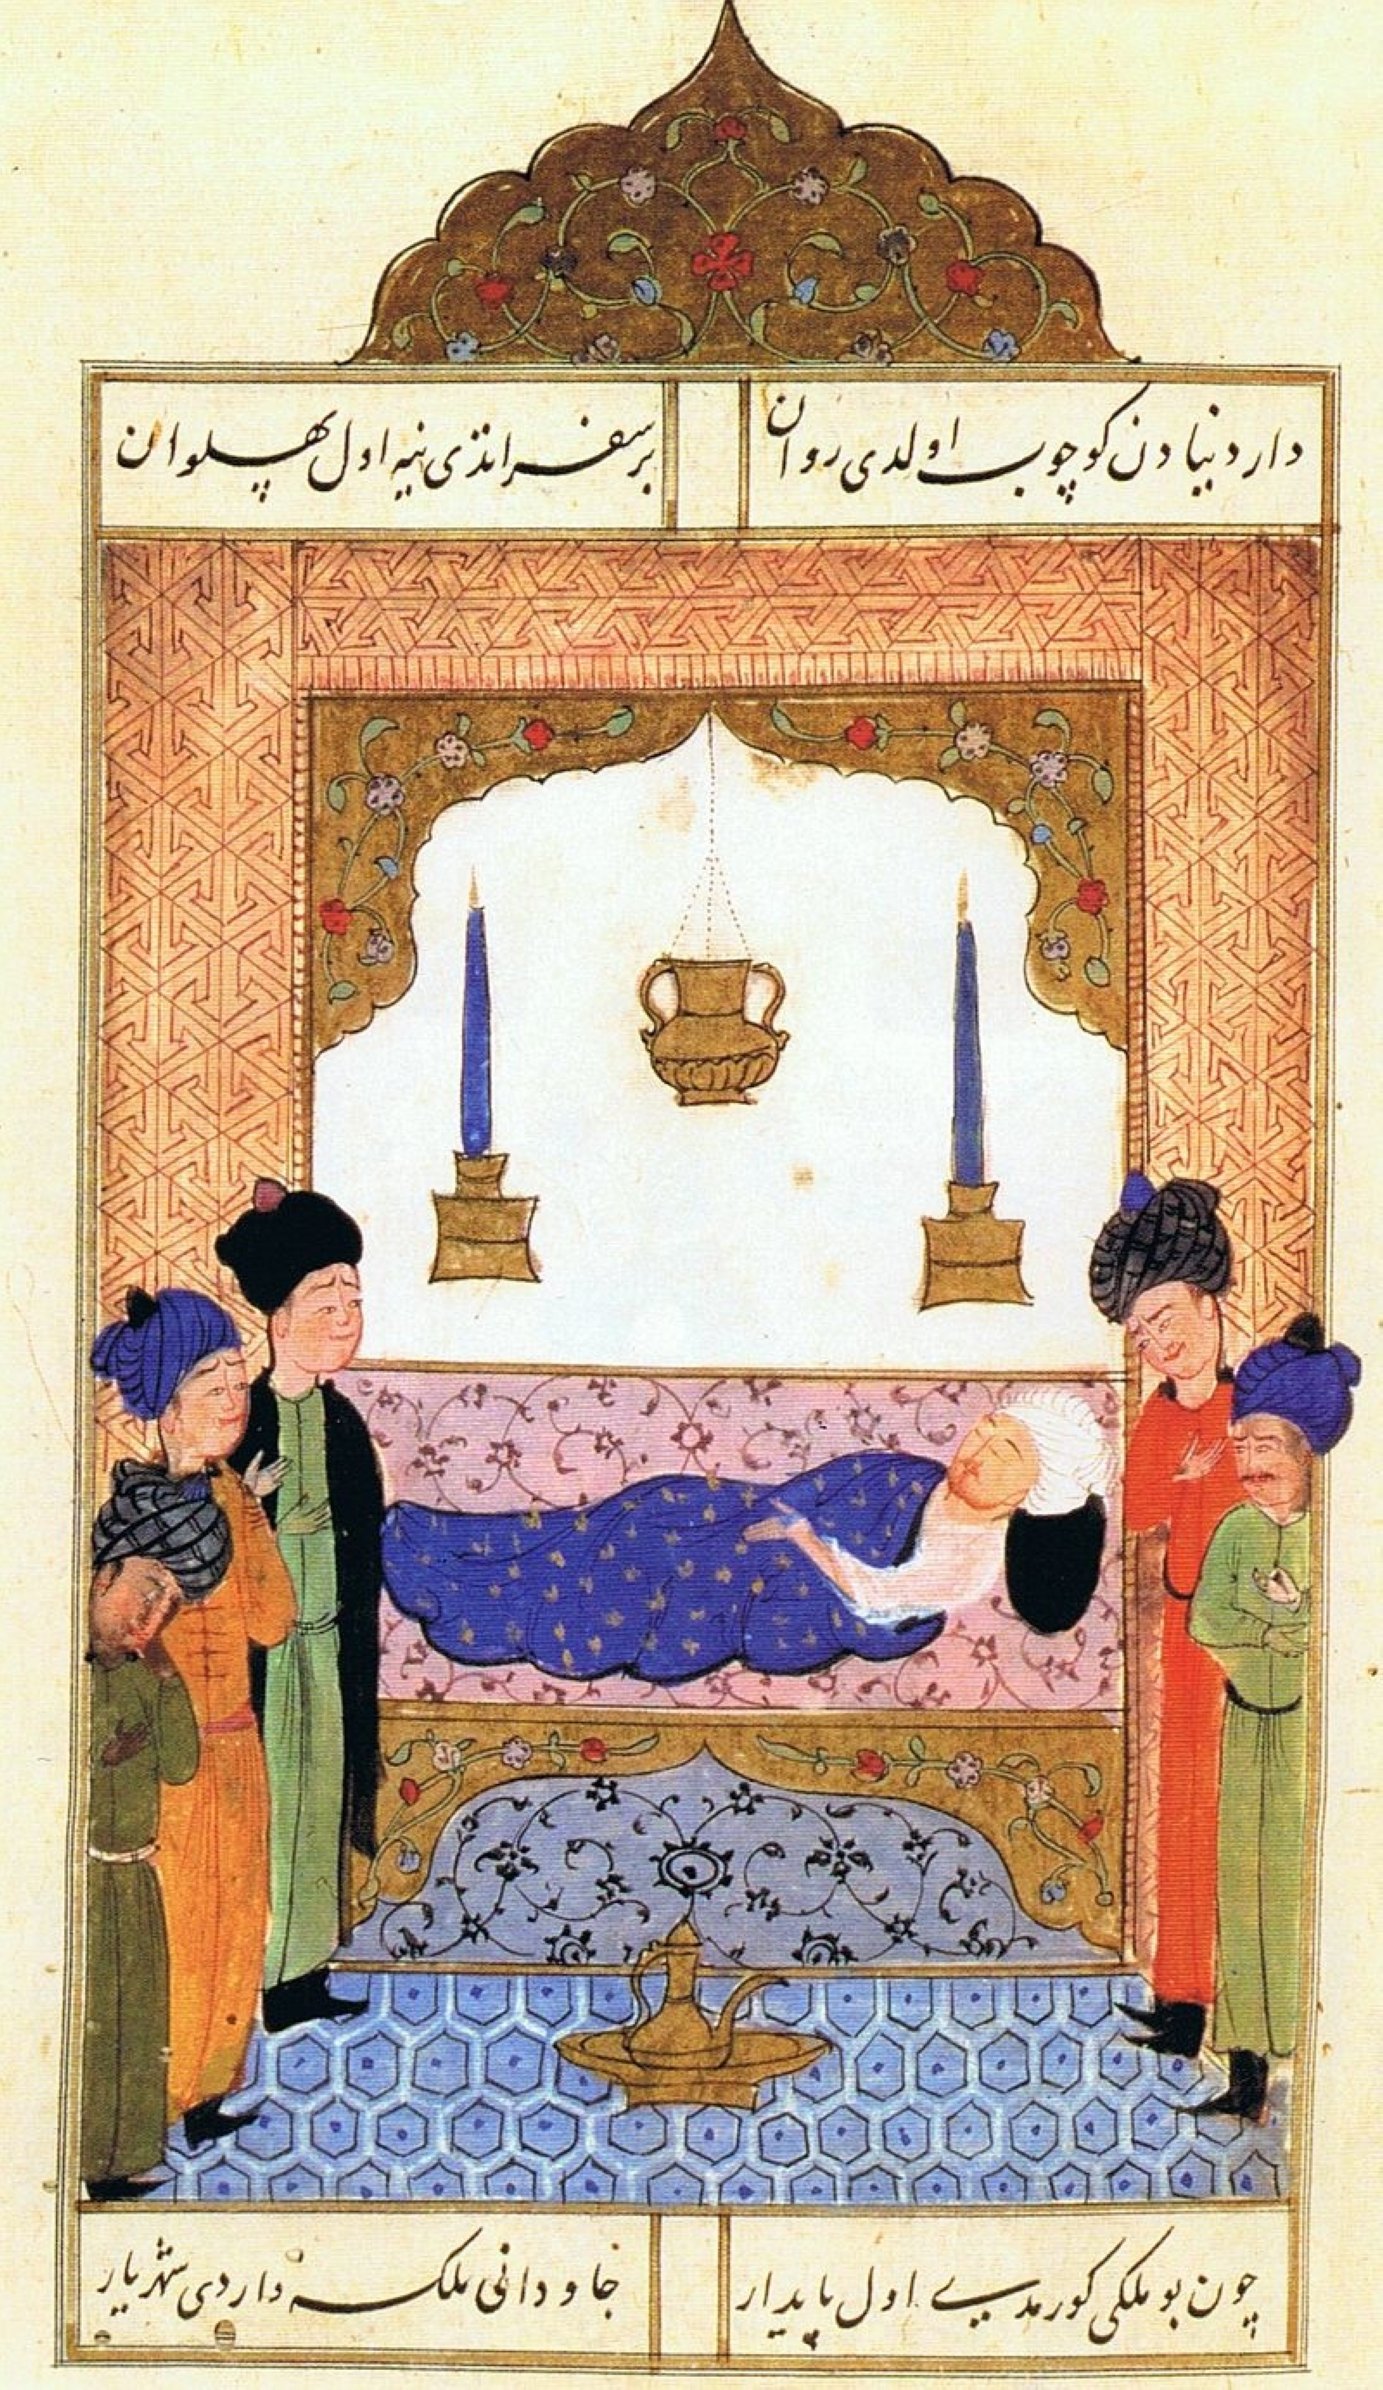 An Ottoman miniature depicts Sultan Selim I on his deathbed. (Wikimedia Photo)